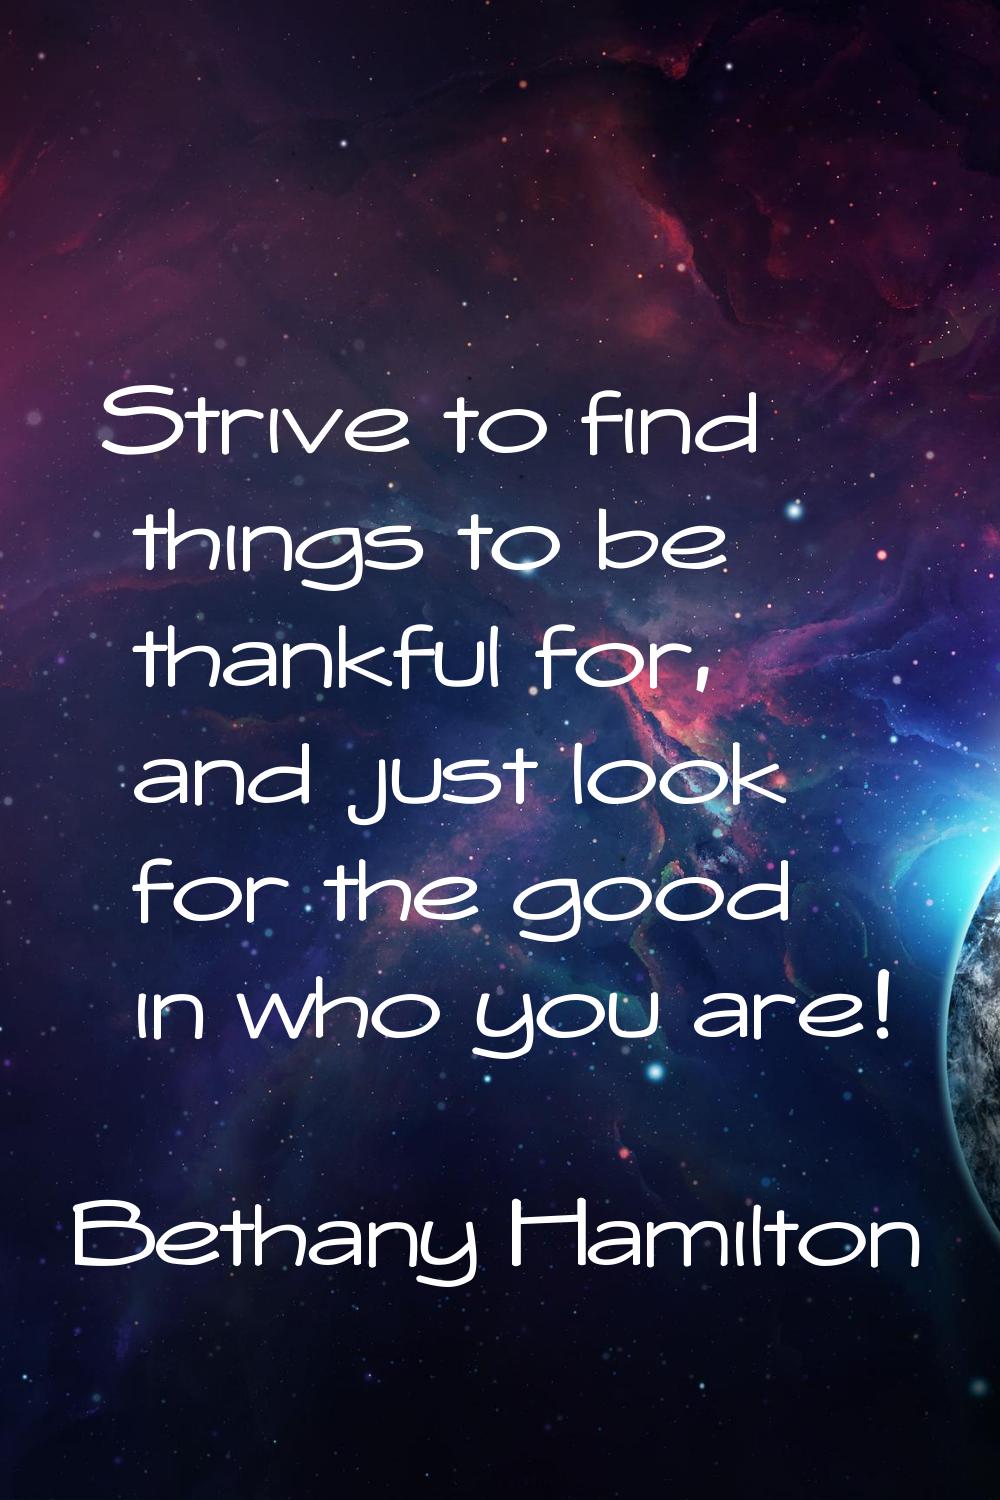 Strive to find things to be thankful for, and just look for the good in who you are!